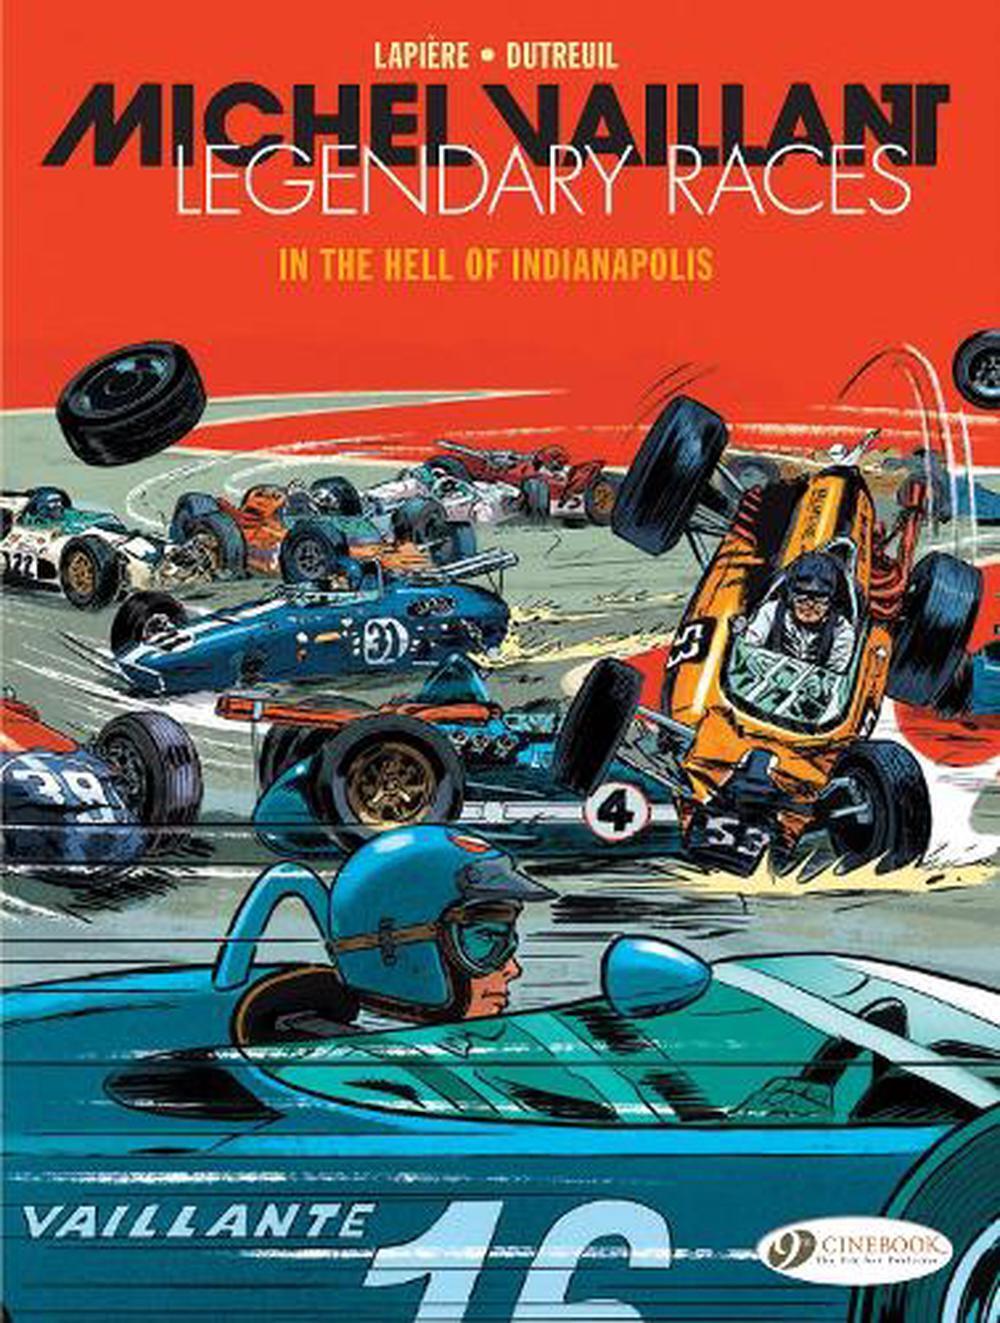 Michel Vaillant - Legendary Races Vol. 1: In The Hell Of Indianapolis by Denis L